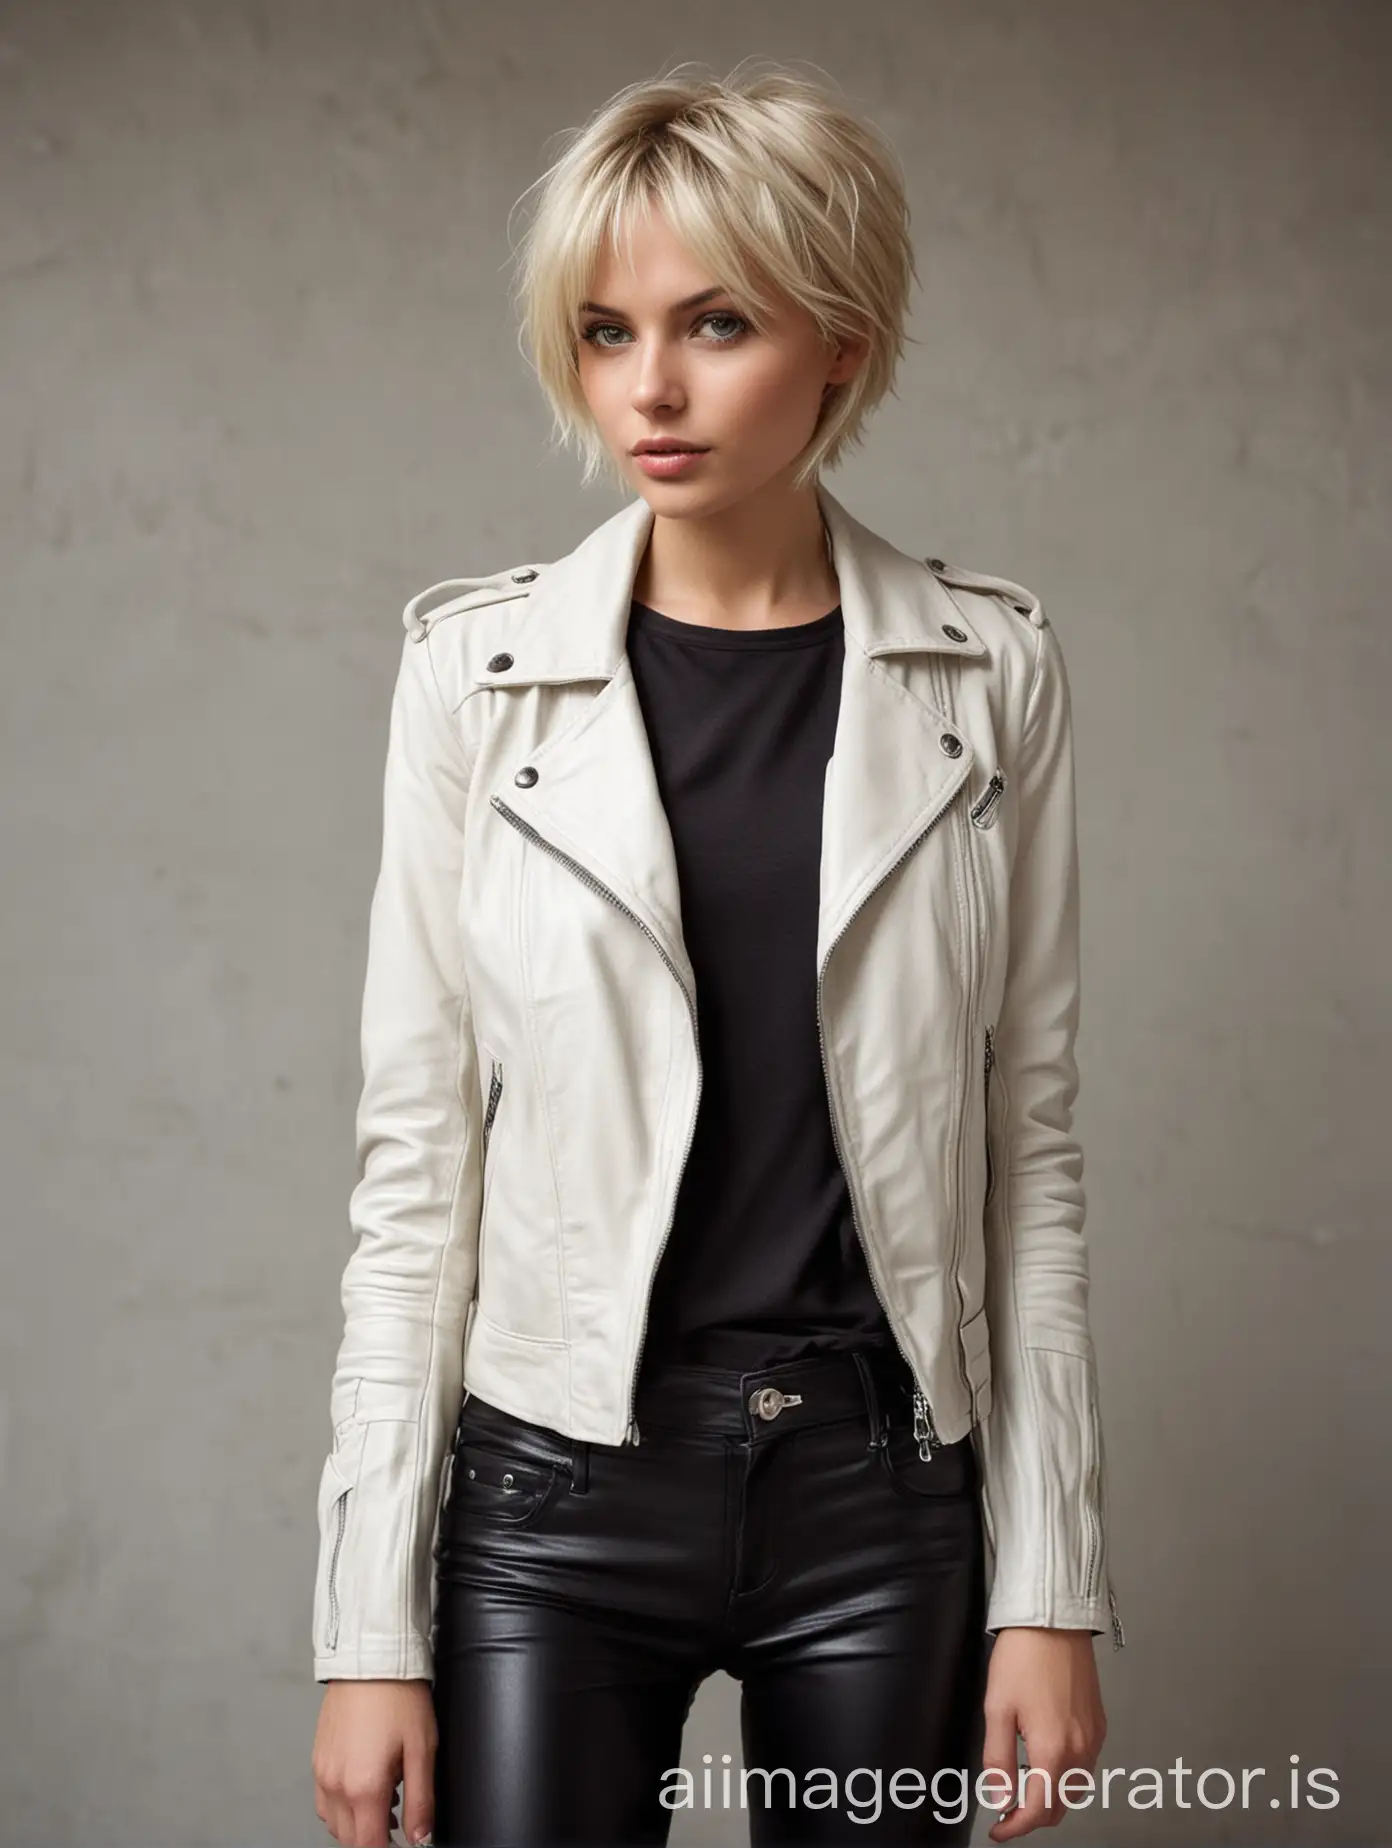 short hair blond beatiful, thin withe leather pants and biker jacket real